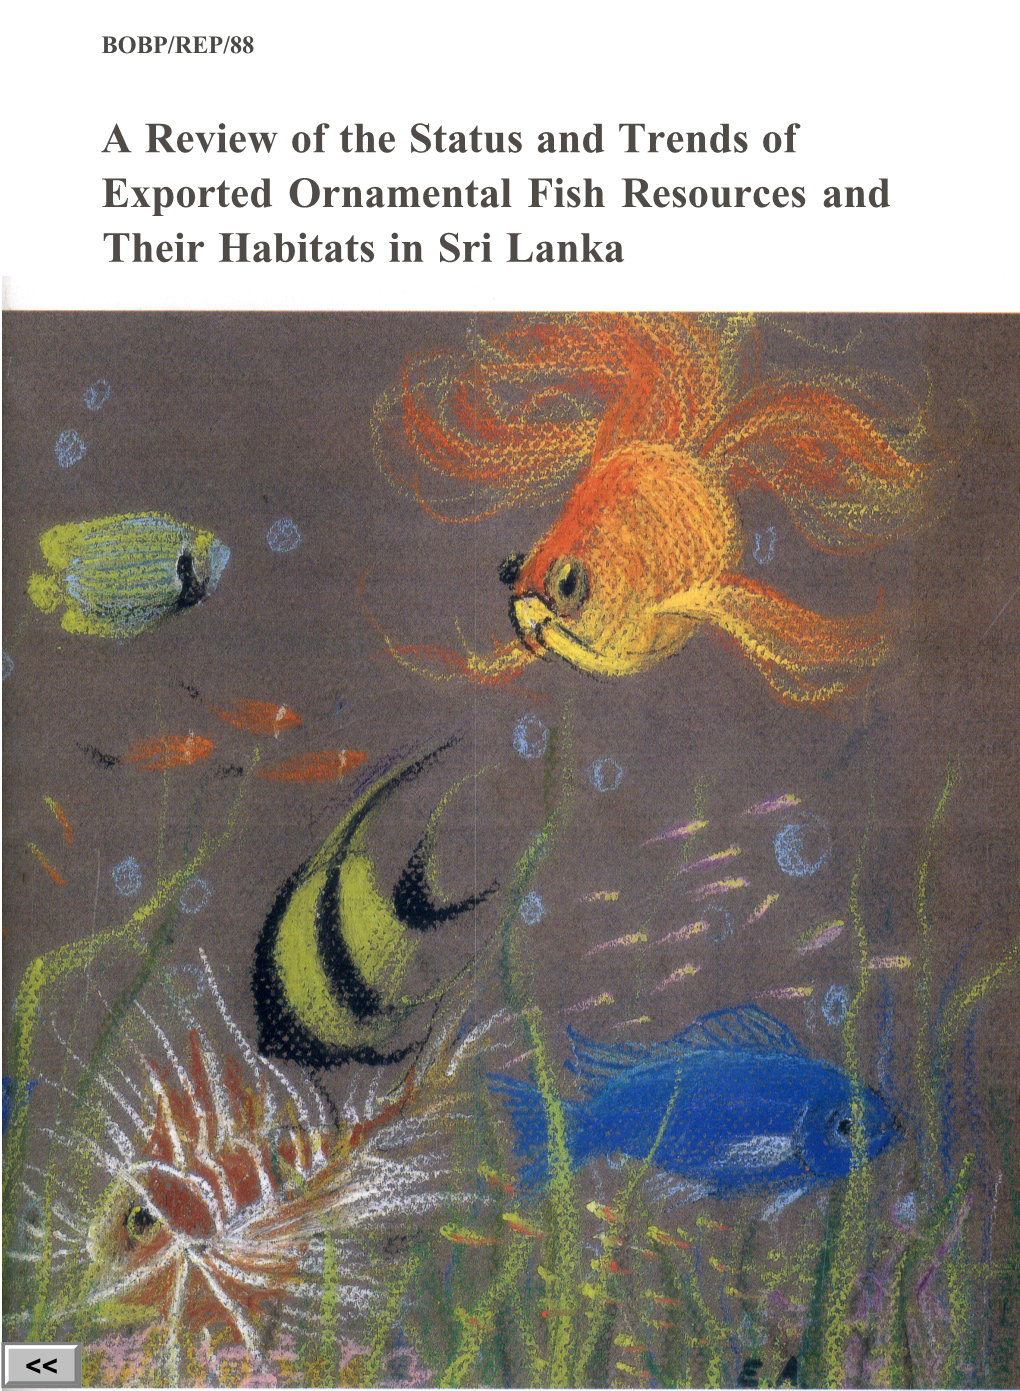 A Review of the Status and Trends of Exported Ornamental Fish Resources and Their Habitats in Sri Lanka BAY of BENGAL PROGRAMME BOBP/REP/88